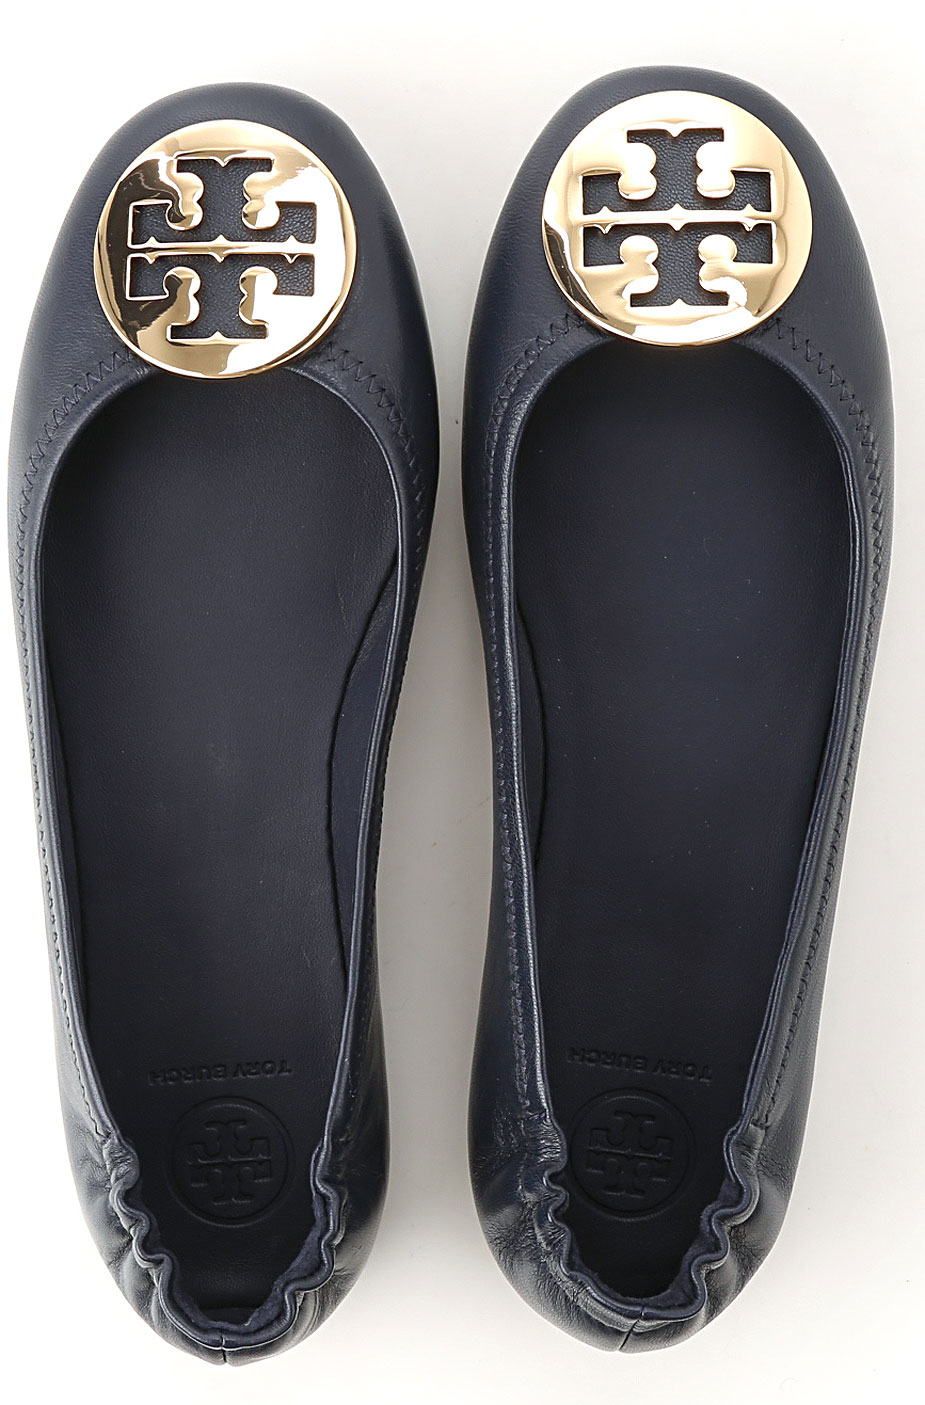 Womens Shoes Tory Burch, Style code: 50393-401-